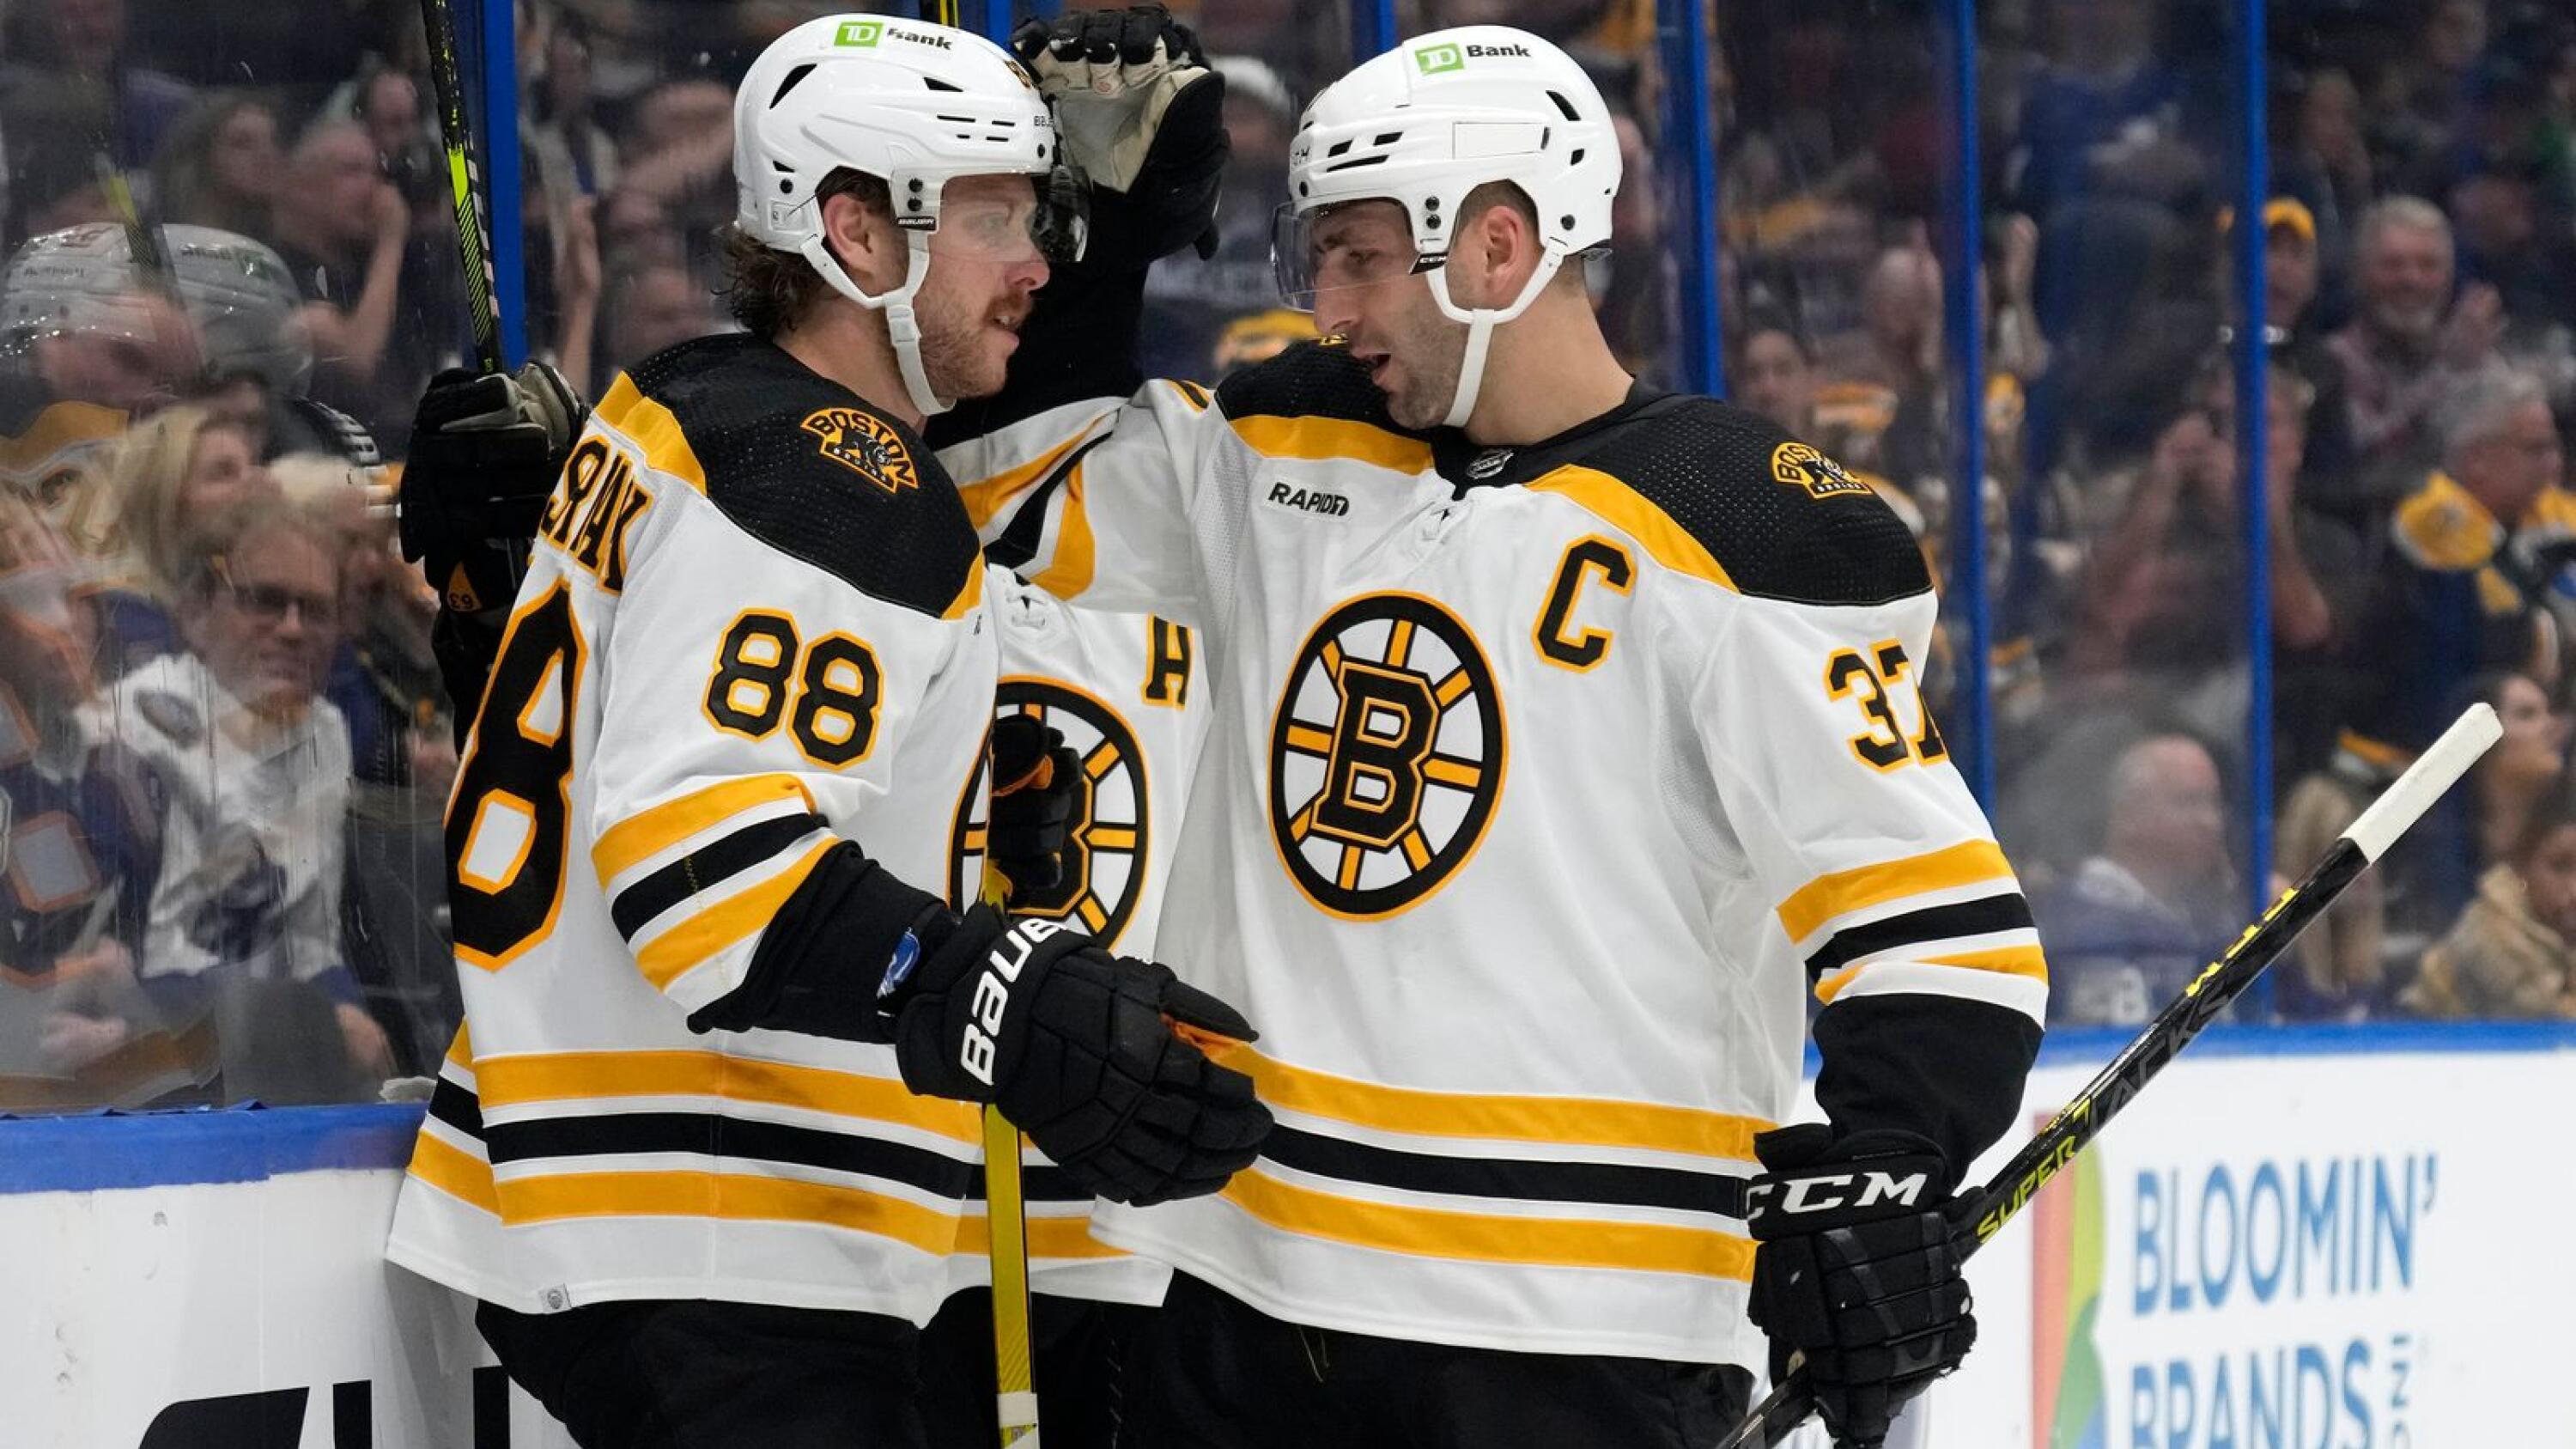 Patrice Bergeron injury: Bruins forward leaves with upper-body